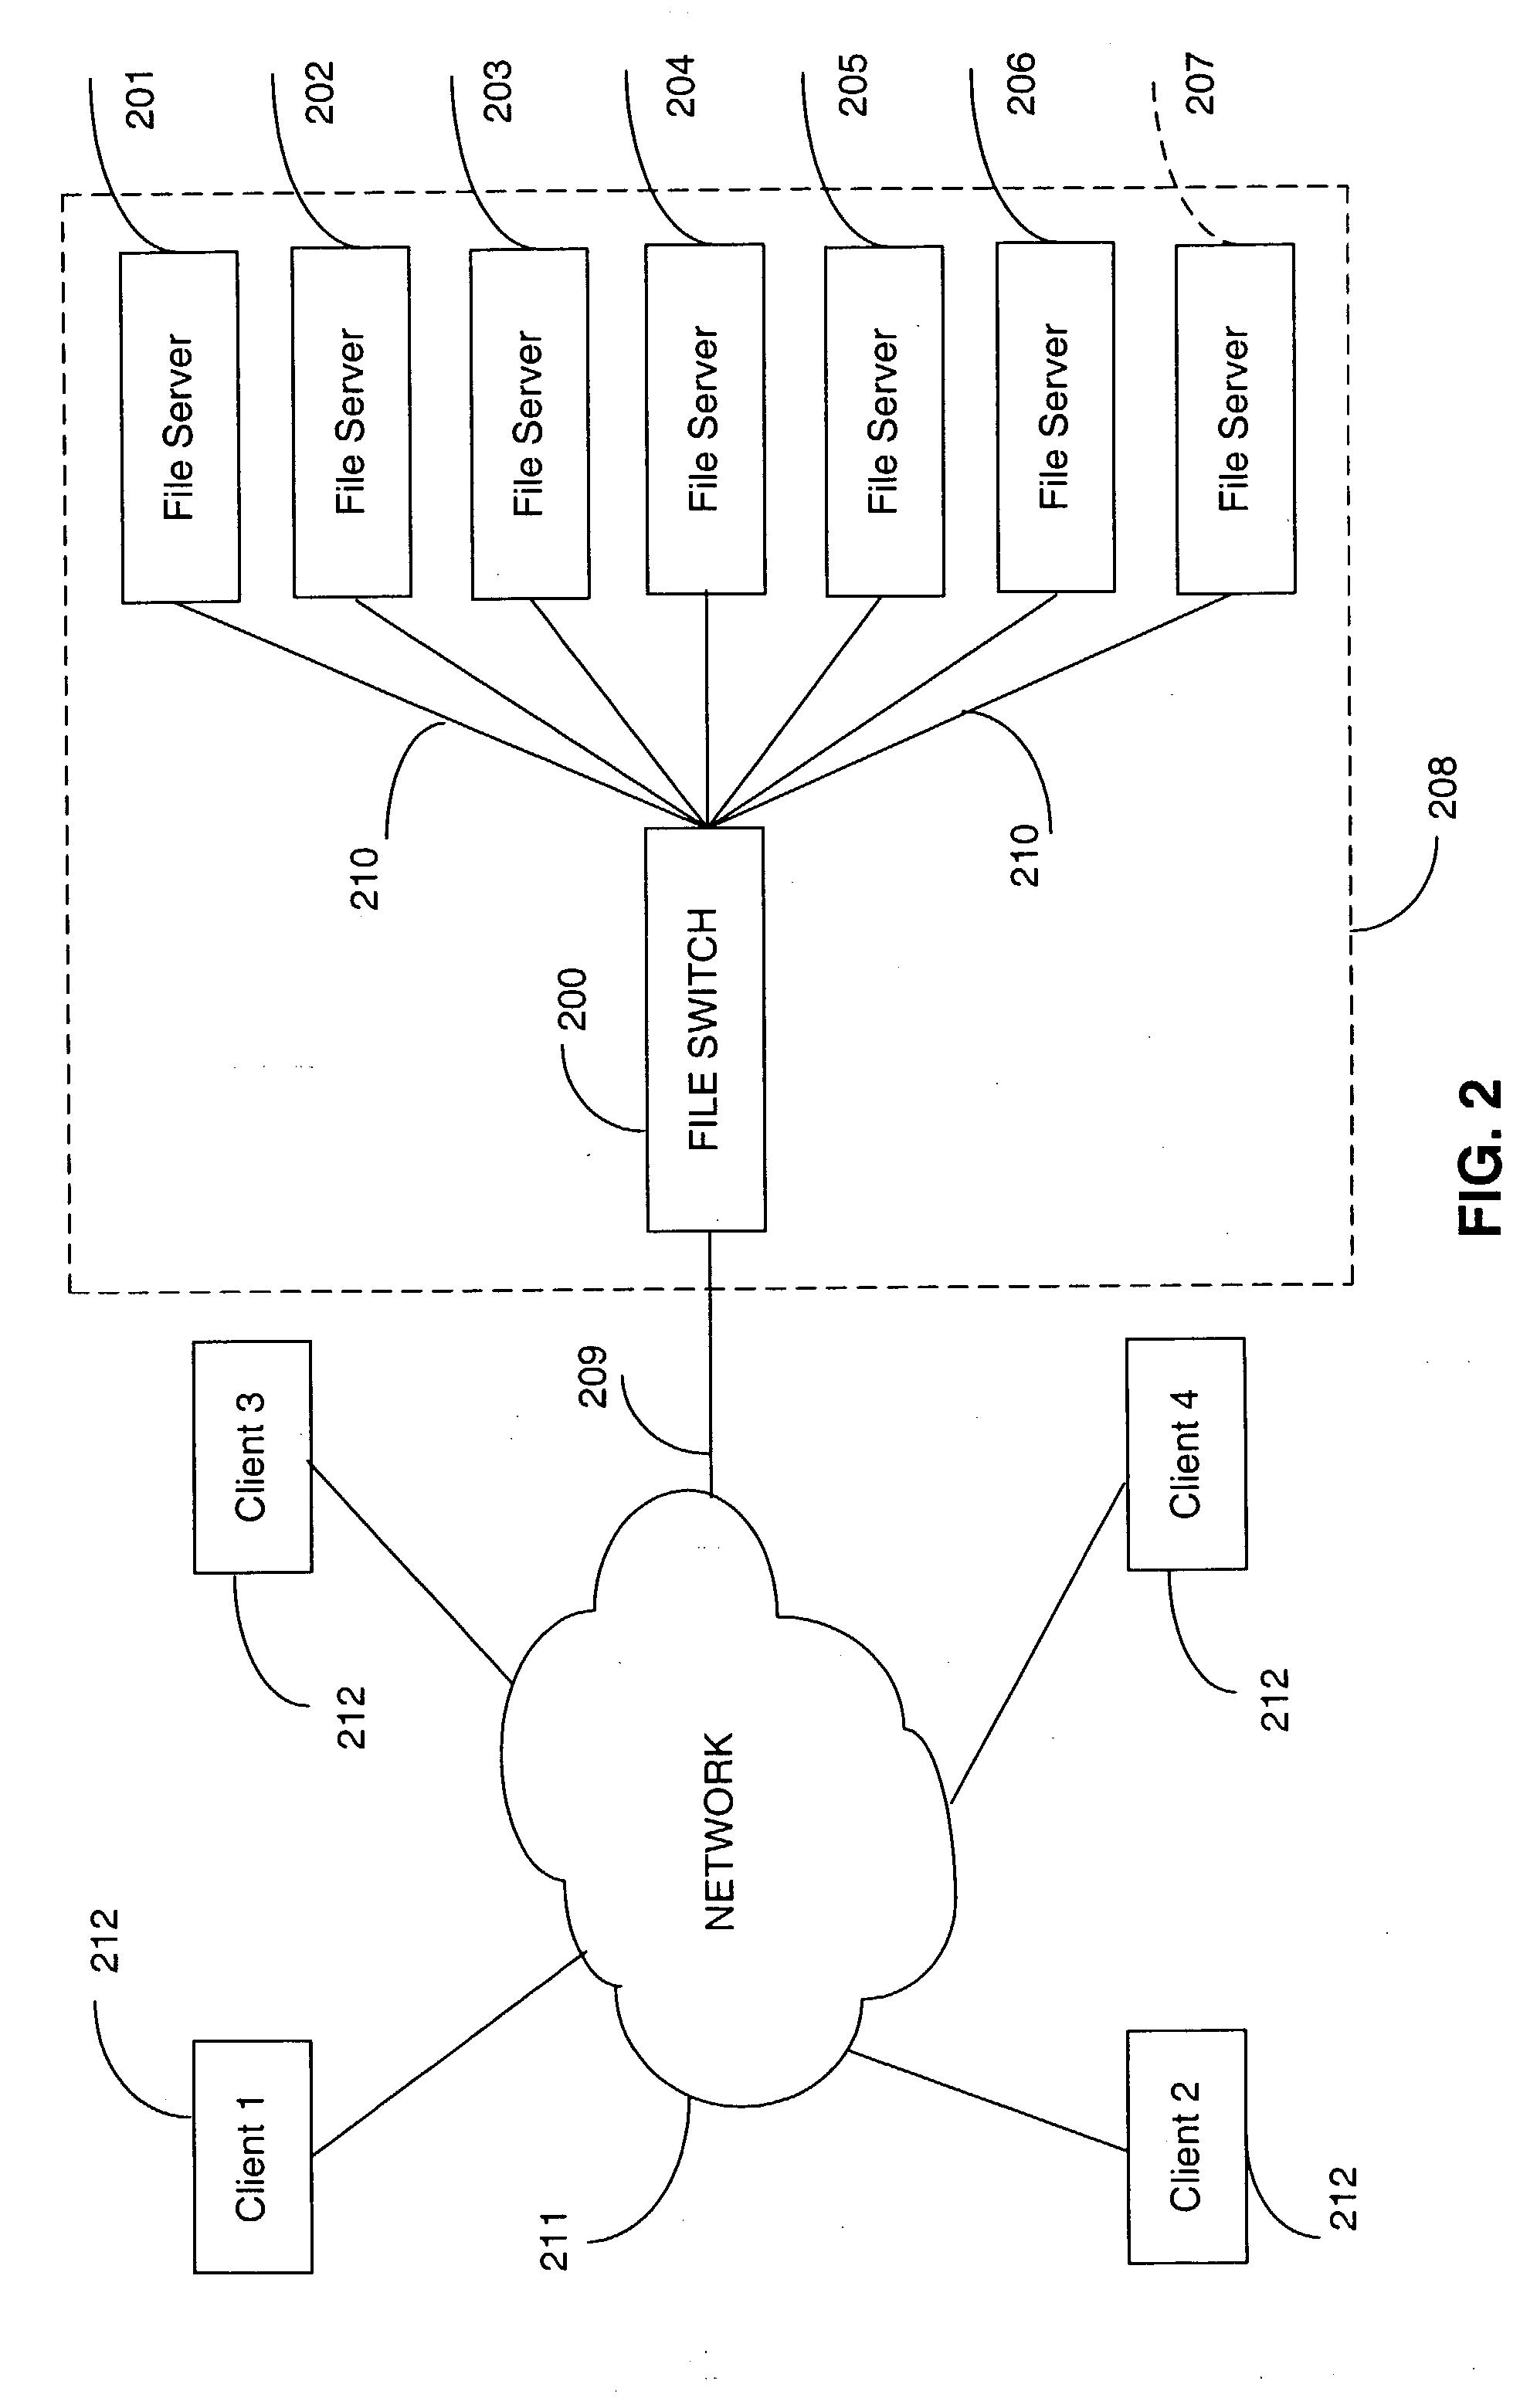 Directory aggregation for files distributed over a plurality of servers in a switched file system